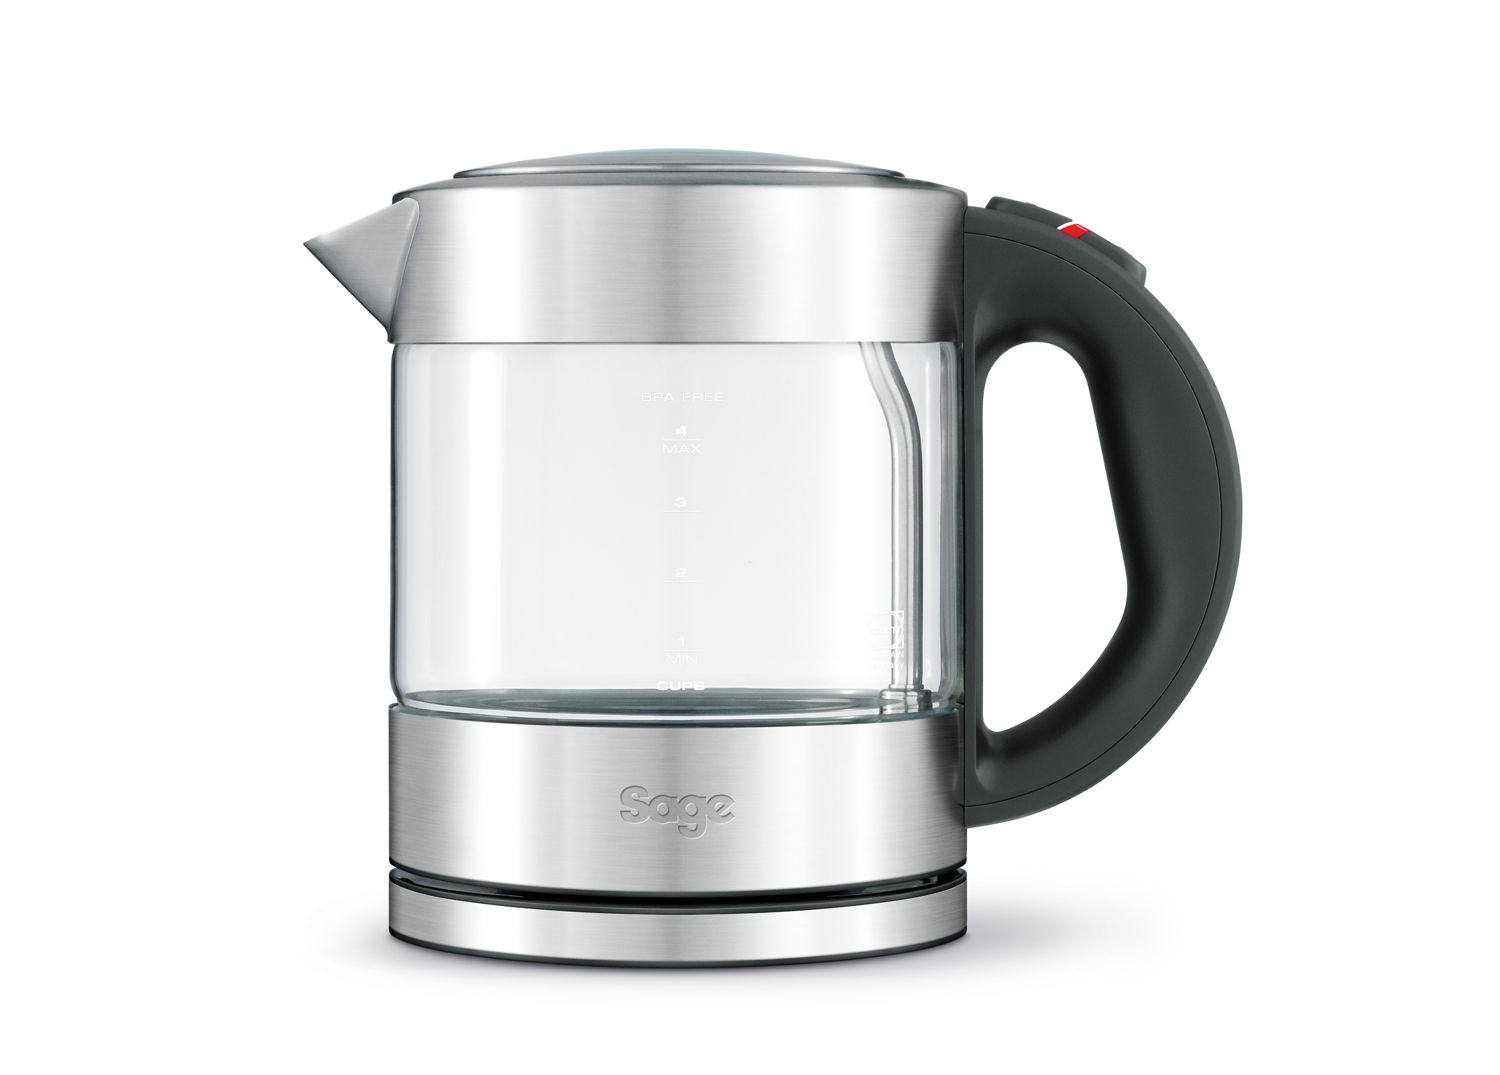 Sage_The Compact Kettle Pure_Packshot _1_EUR79,90